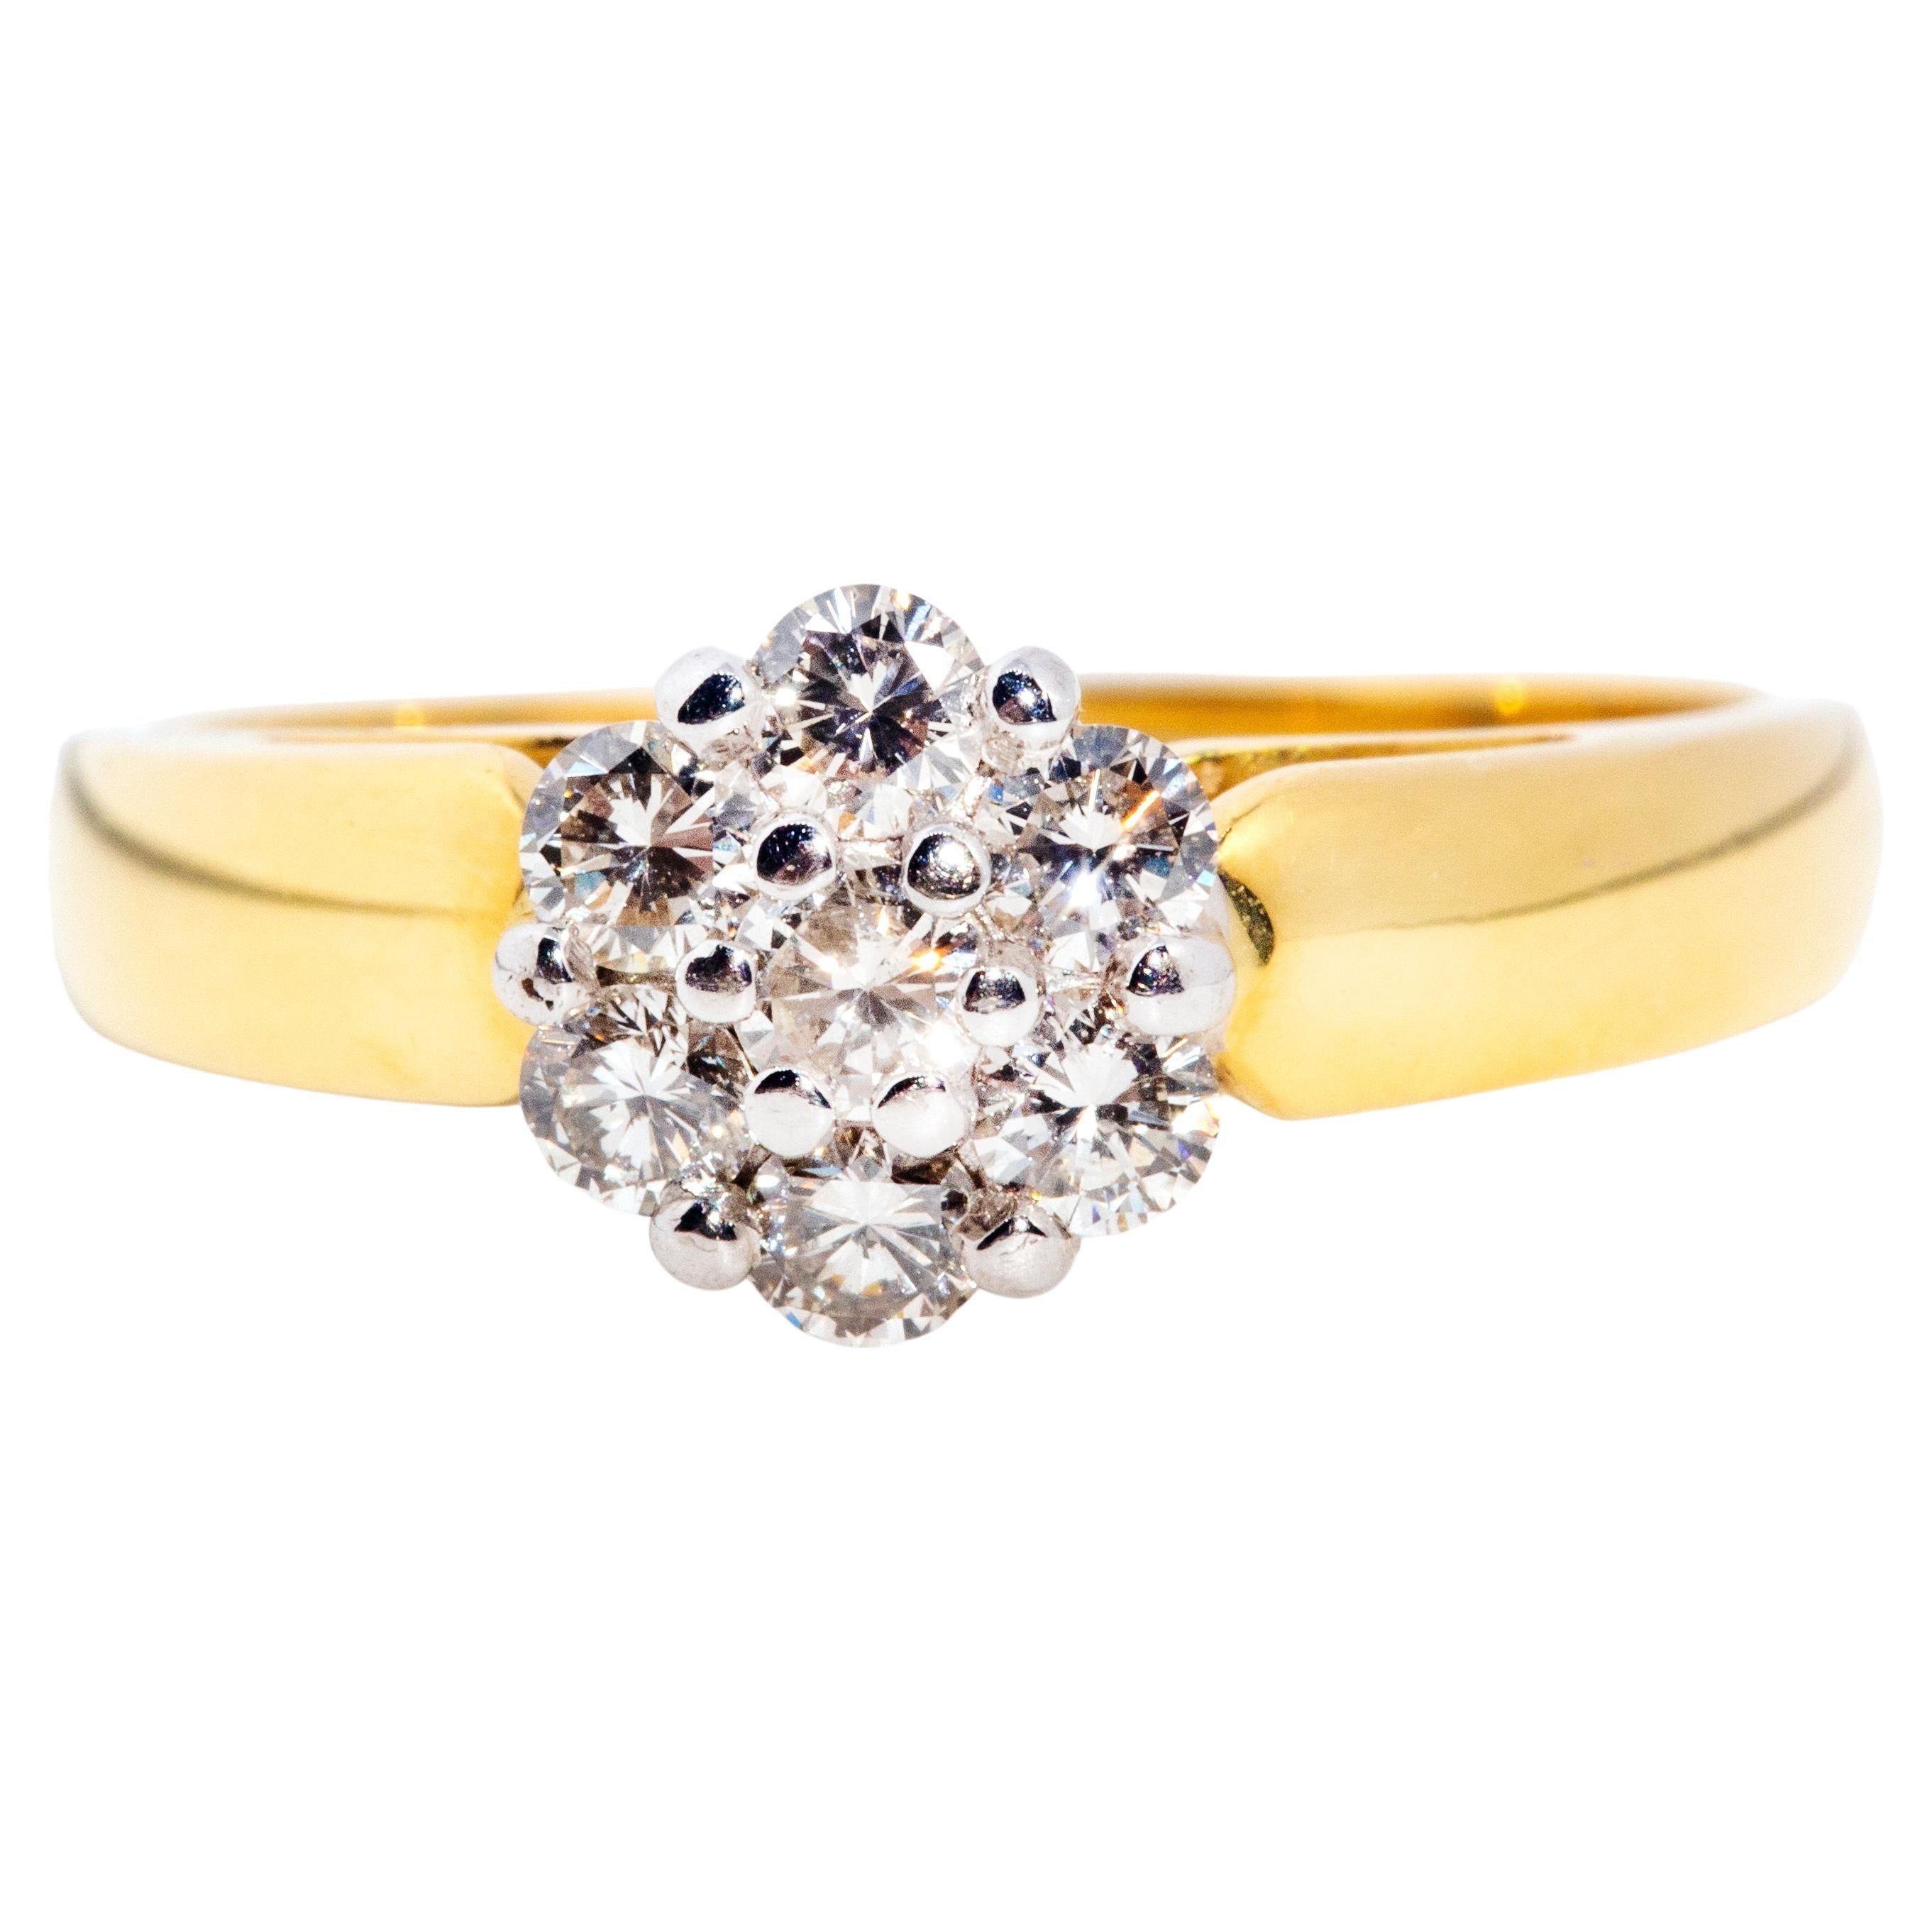 Contemporary 18 Carat Yellow Gold Round Brilliant Diamond Flower Cluster Ring